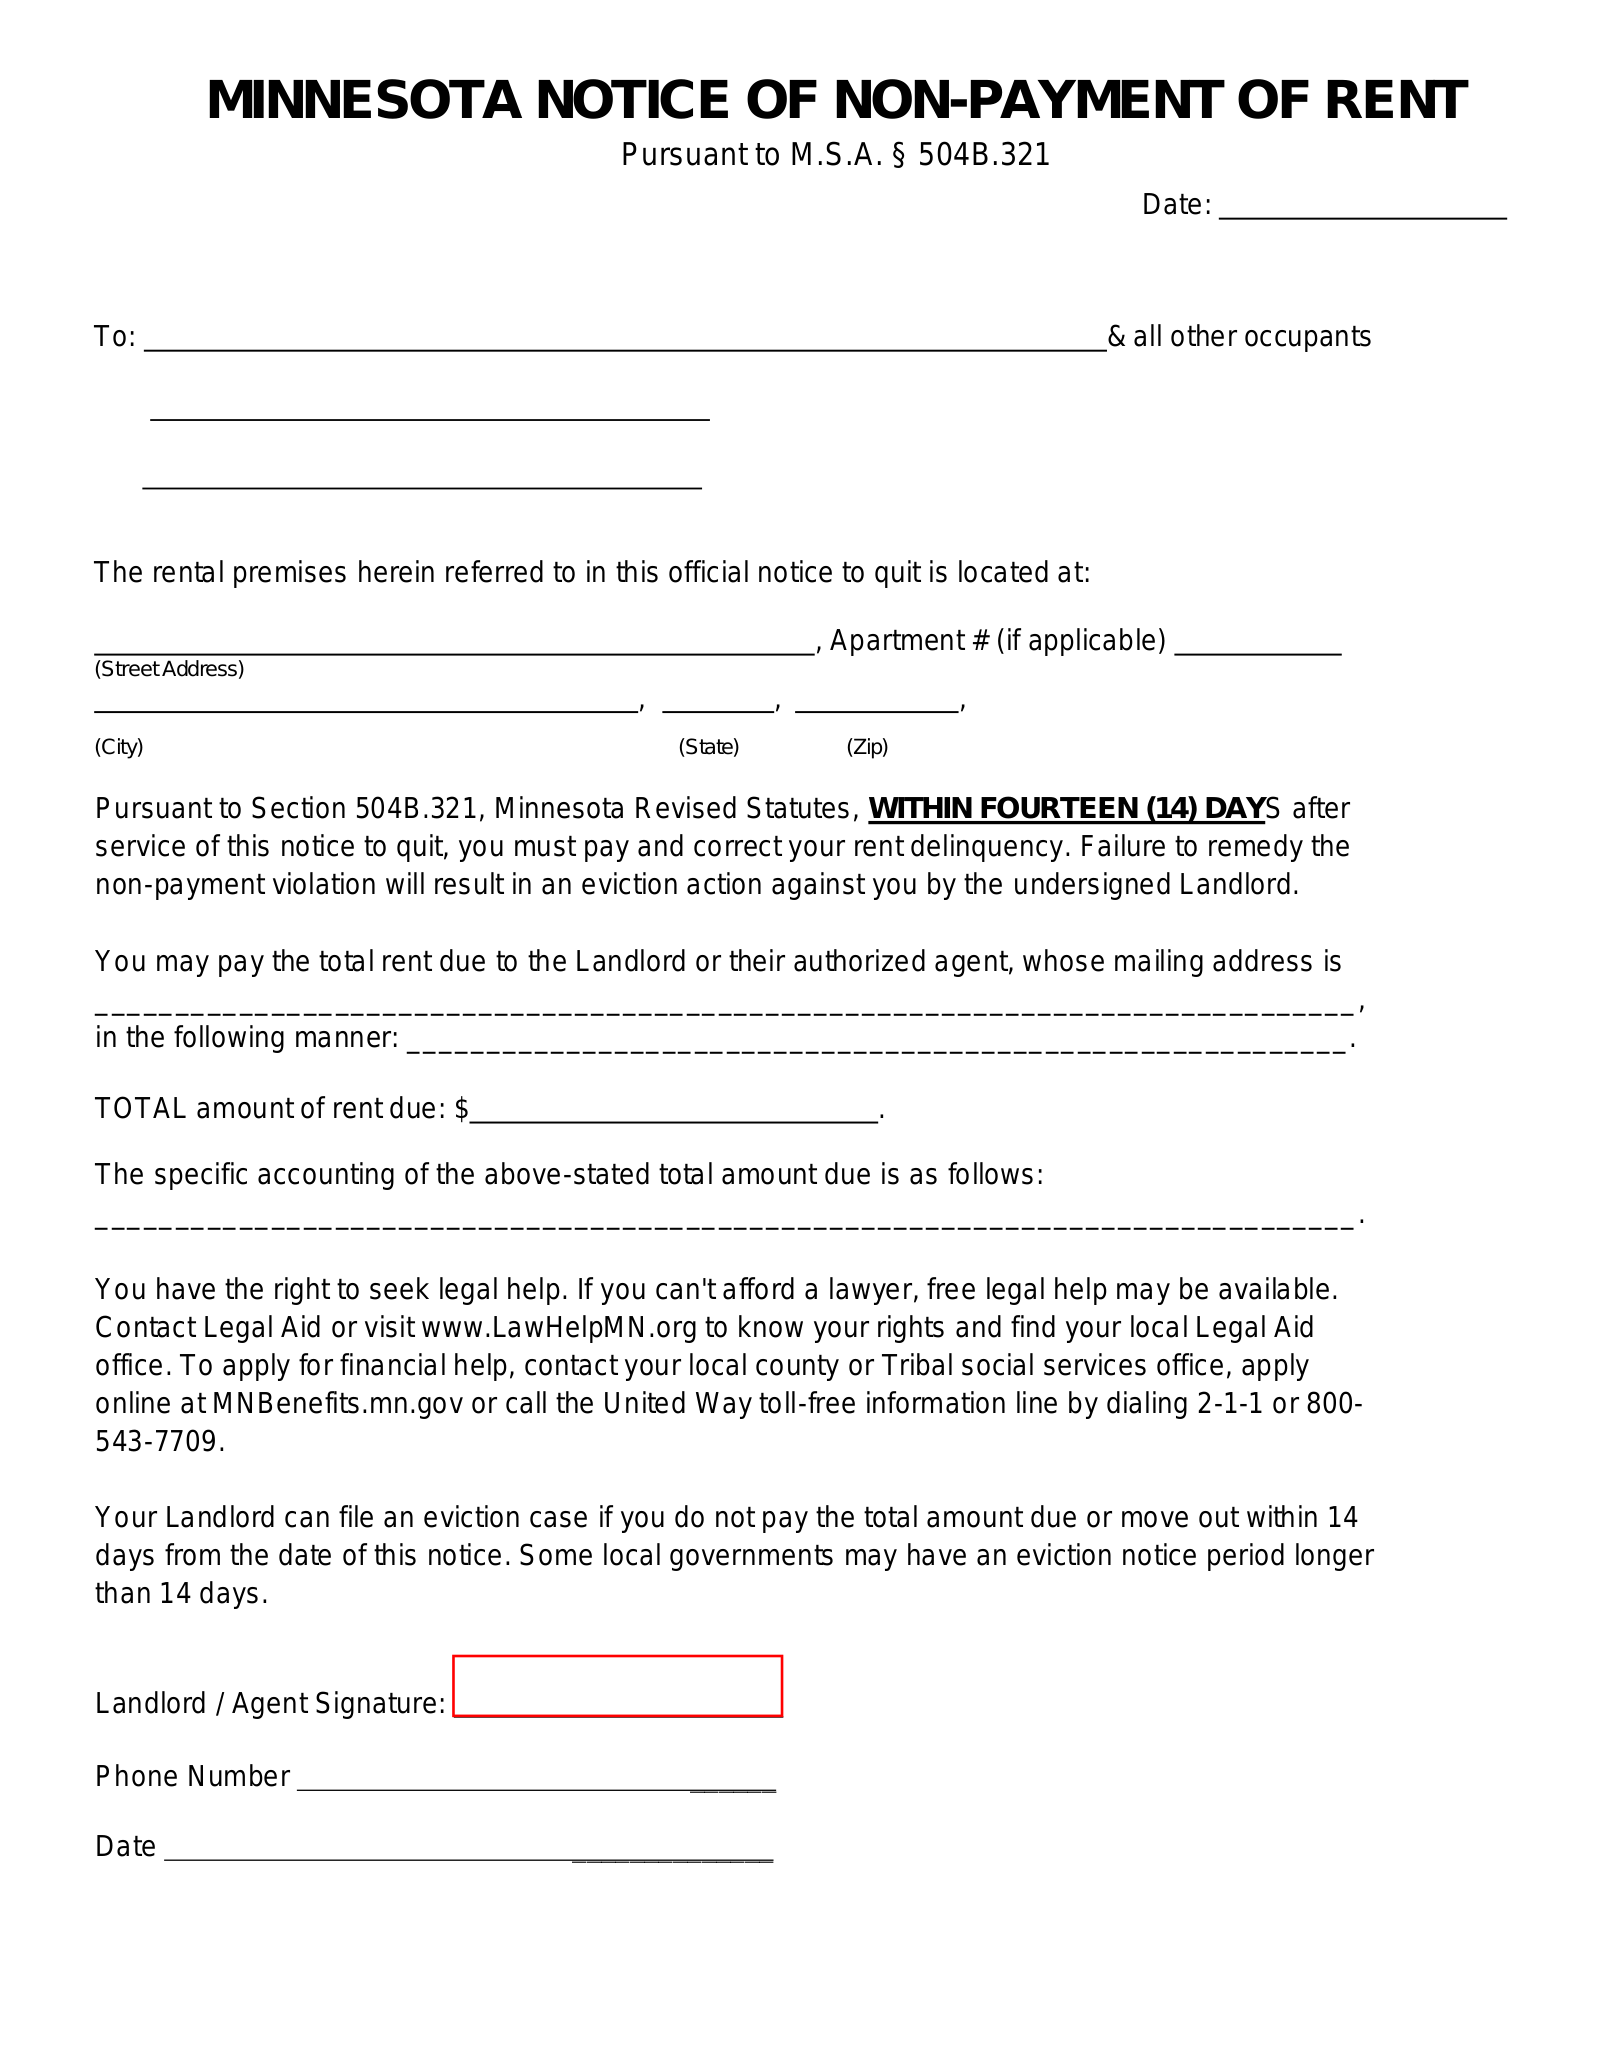 Minnesota Notice to Quit Form | Non-Payment of Rent